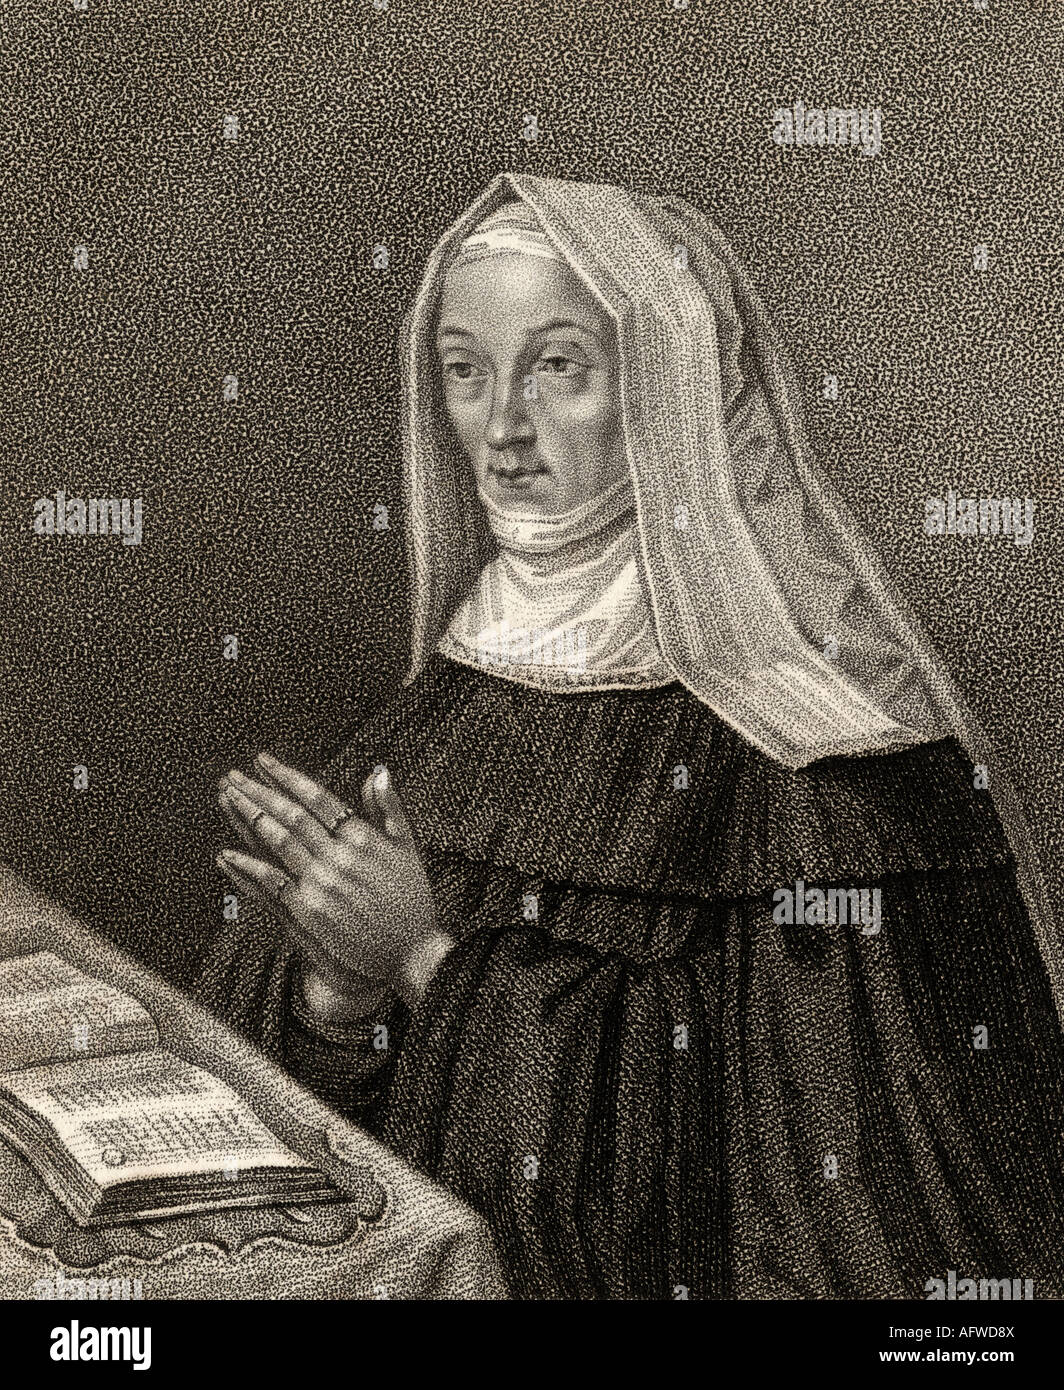 Lady Margaret Beaufort, Countess of Richmond and Derby, 1443 - 1509. Mother of English king Henry VII. Stock Photo